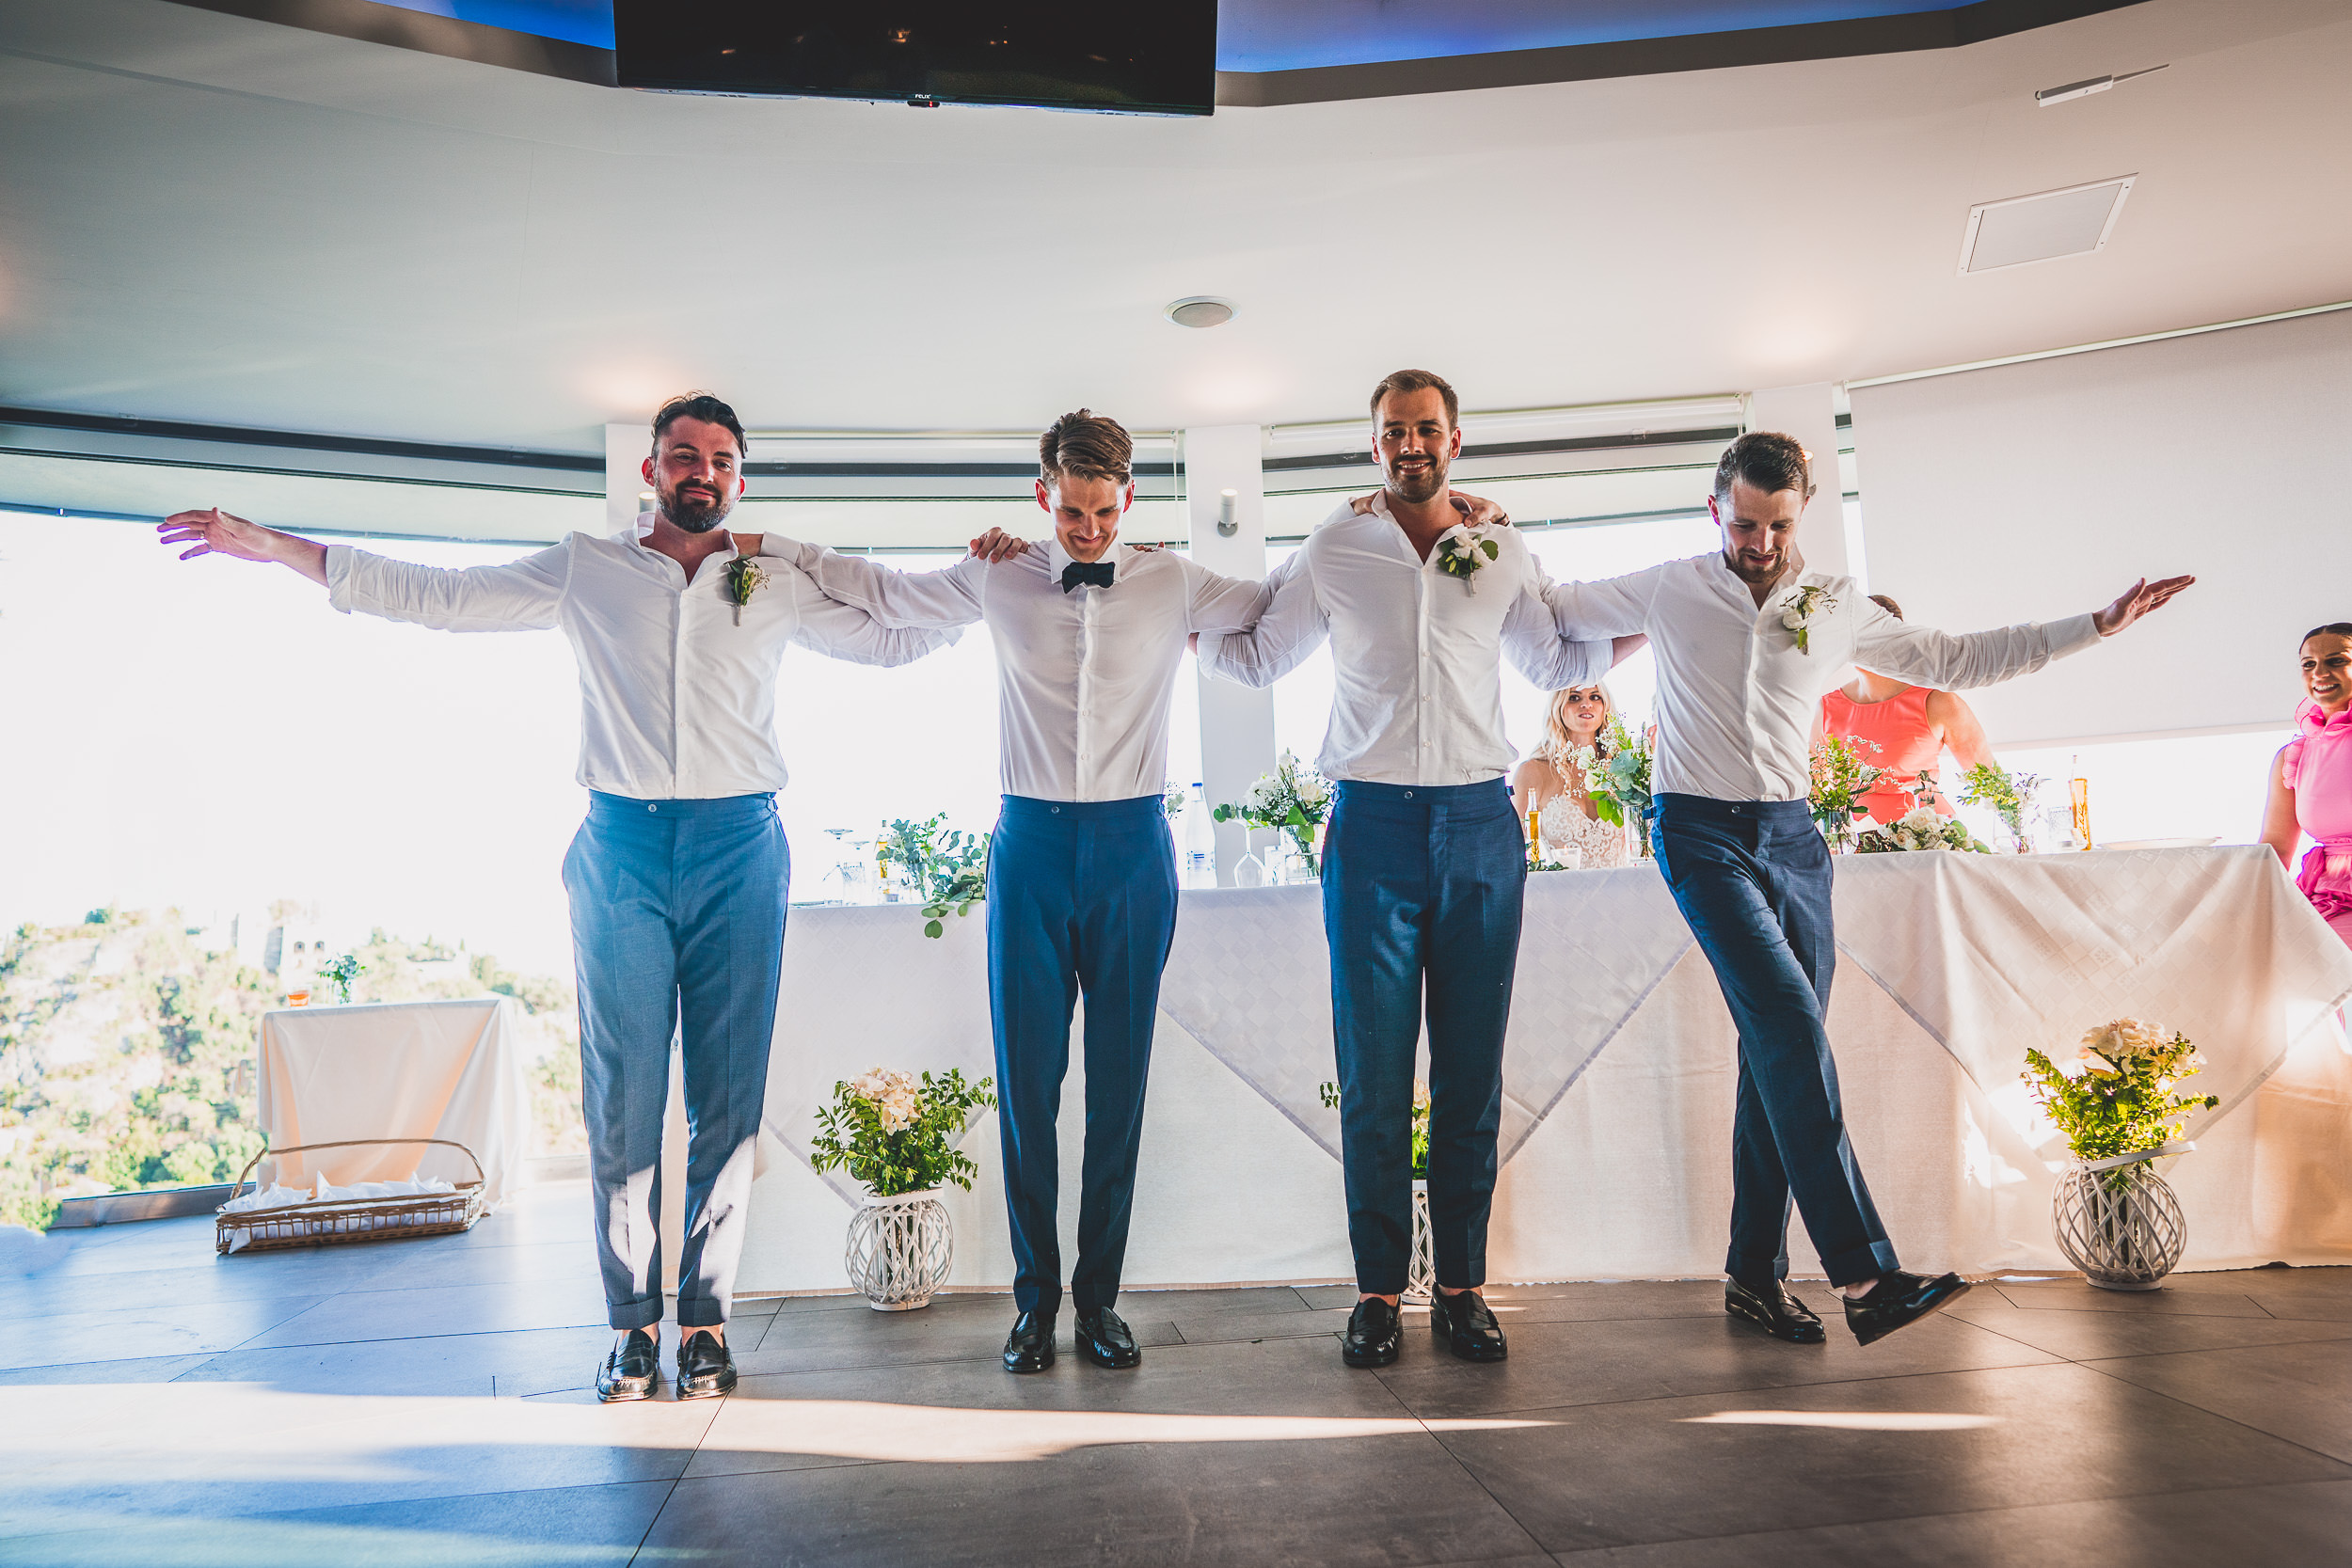 A group of groomsmen posing for a wedding photo in front of the bride and a table.